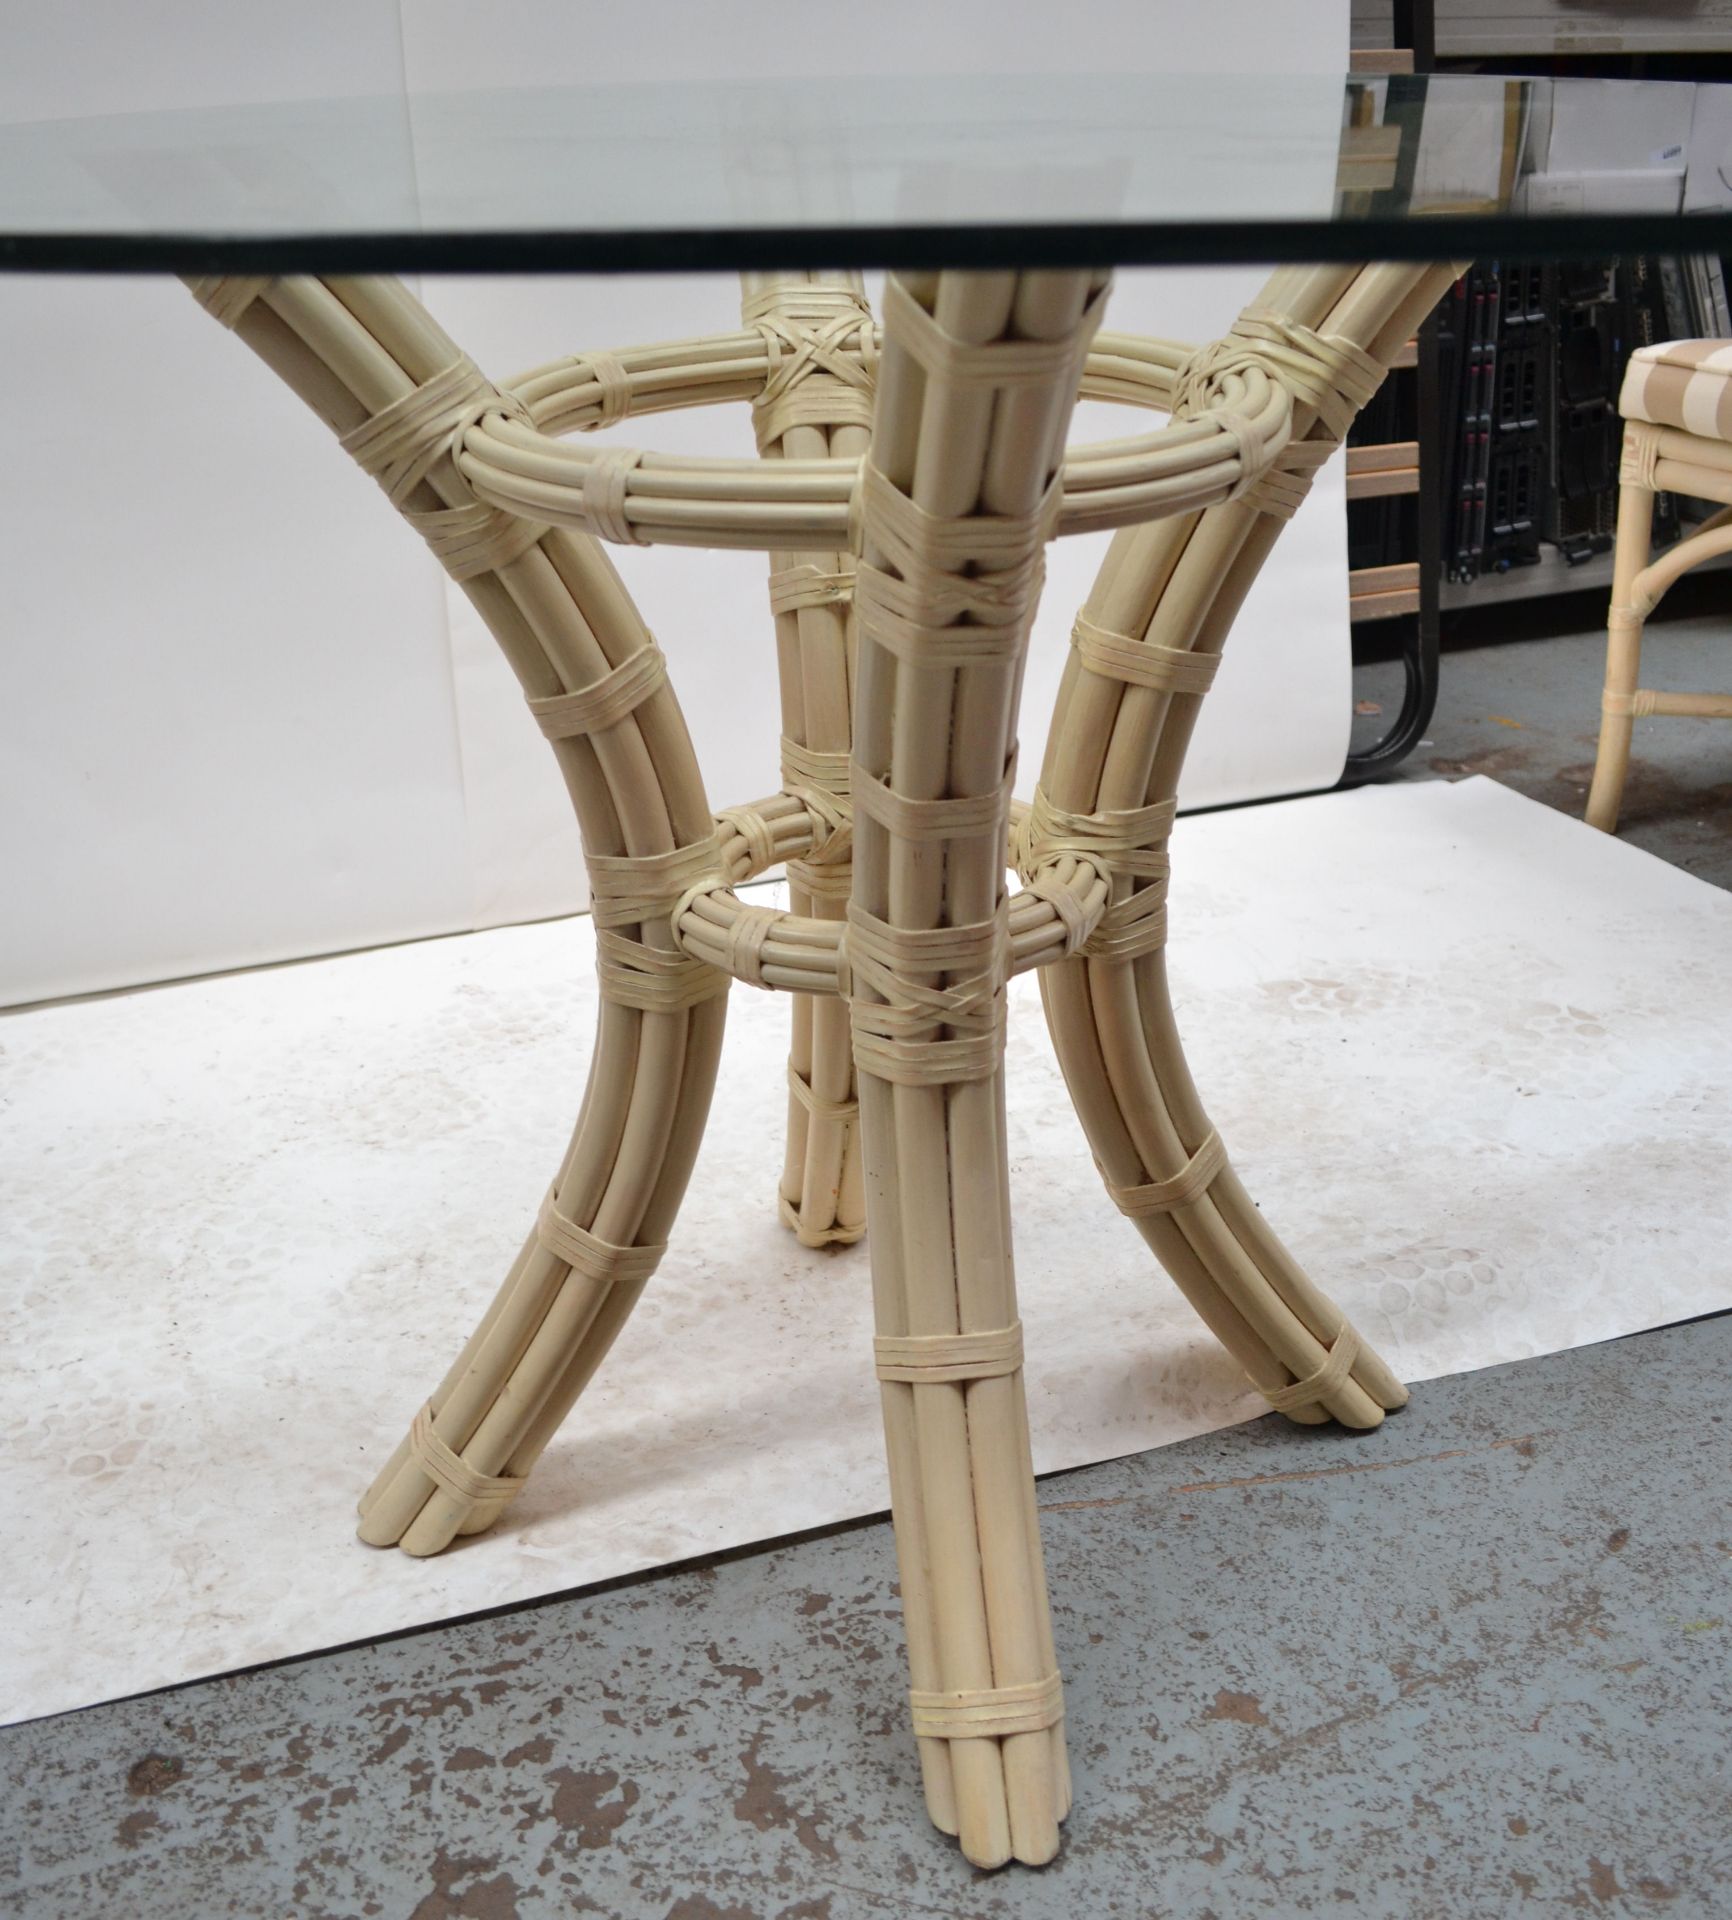 Glass Topped Cane Table with 4 Chairs - AE010 - CL007 - Location: Altrincham WA14 Dimensions: - Image 12 of 14